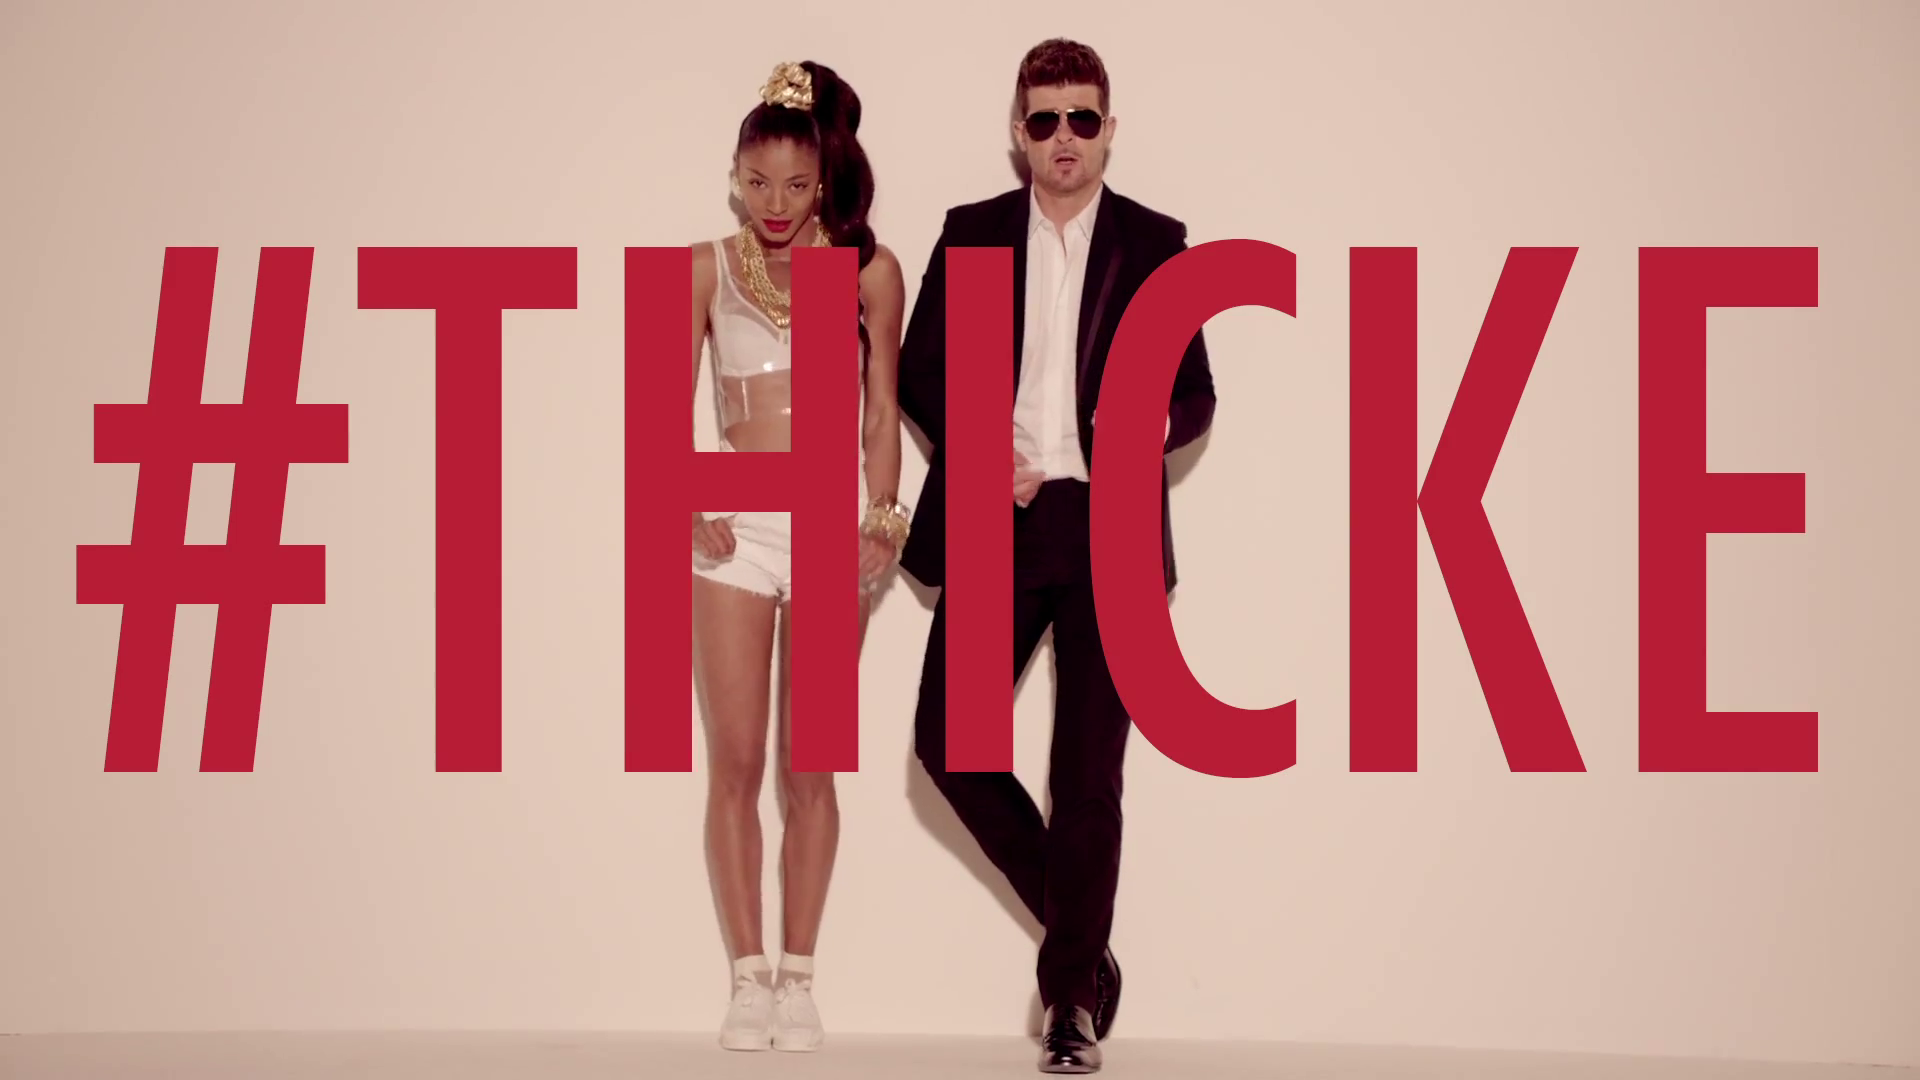 T me ftid group. Robin Thicke blurred lines. Robin Thicke blurred lines ft. T.I., Pharrell. Robin Thicke личная жизнь. Pharrell Williams and Robin Thicke.